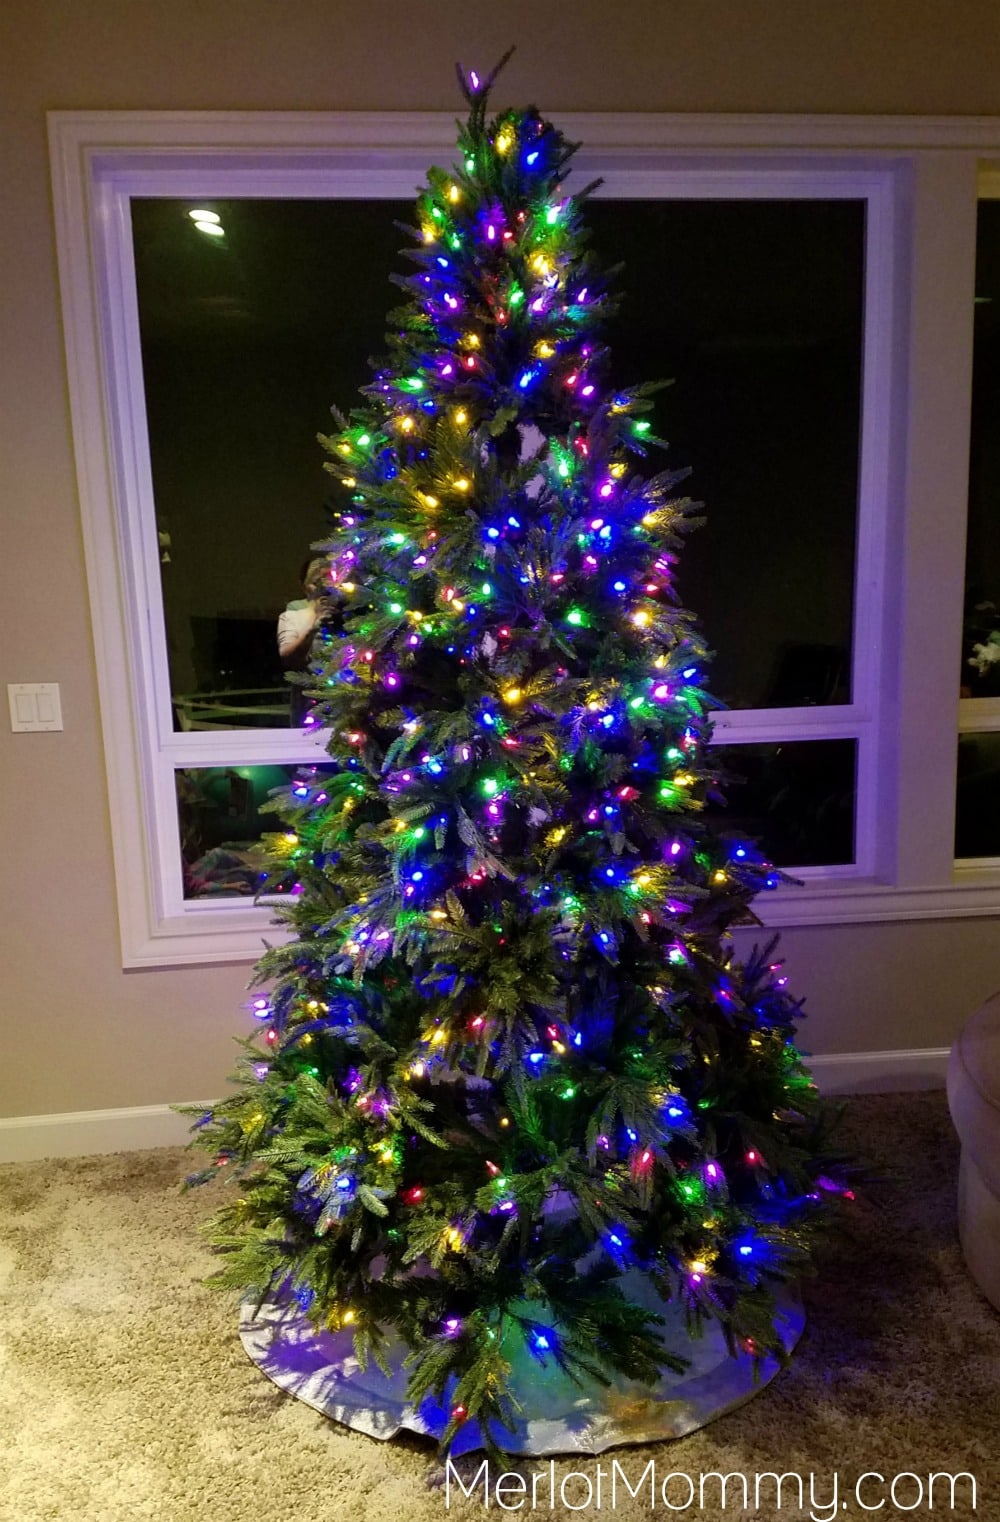 Make Decorating Your Tree for the Holidays Easy with ULTIMA Tree - Muli-Colored LEDs